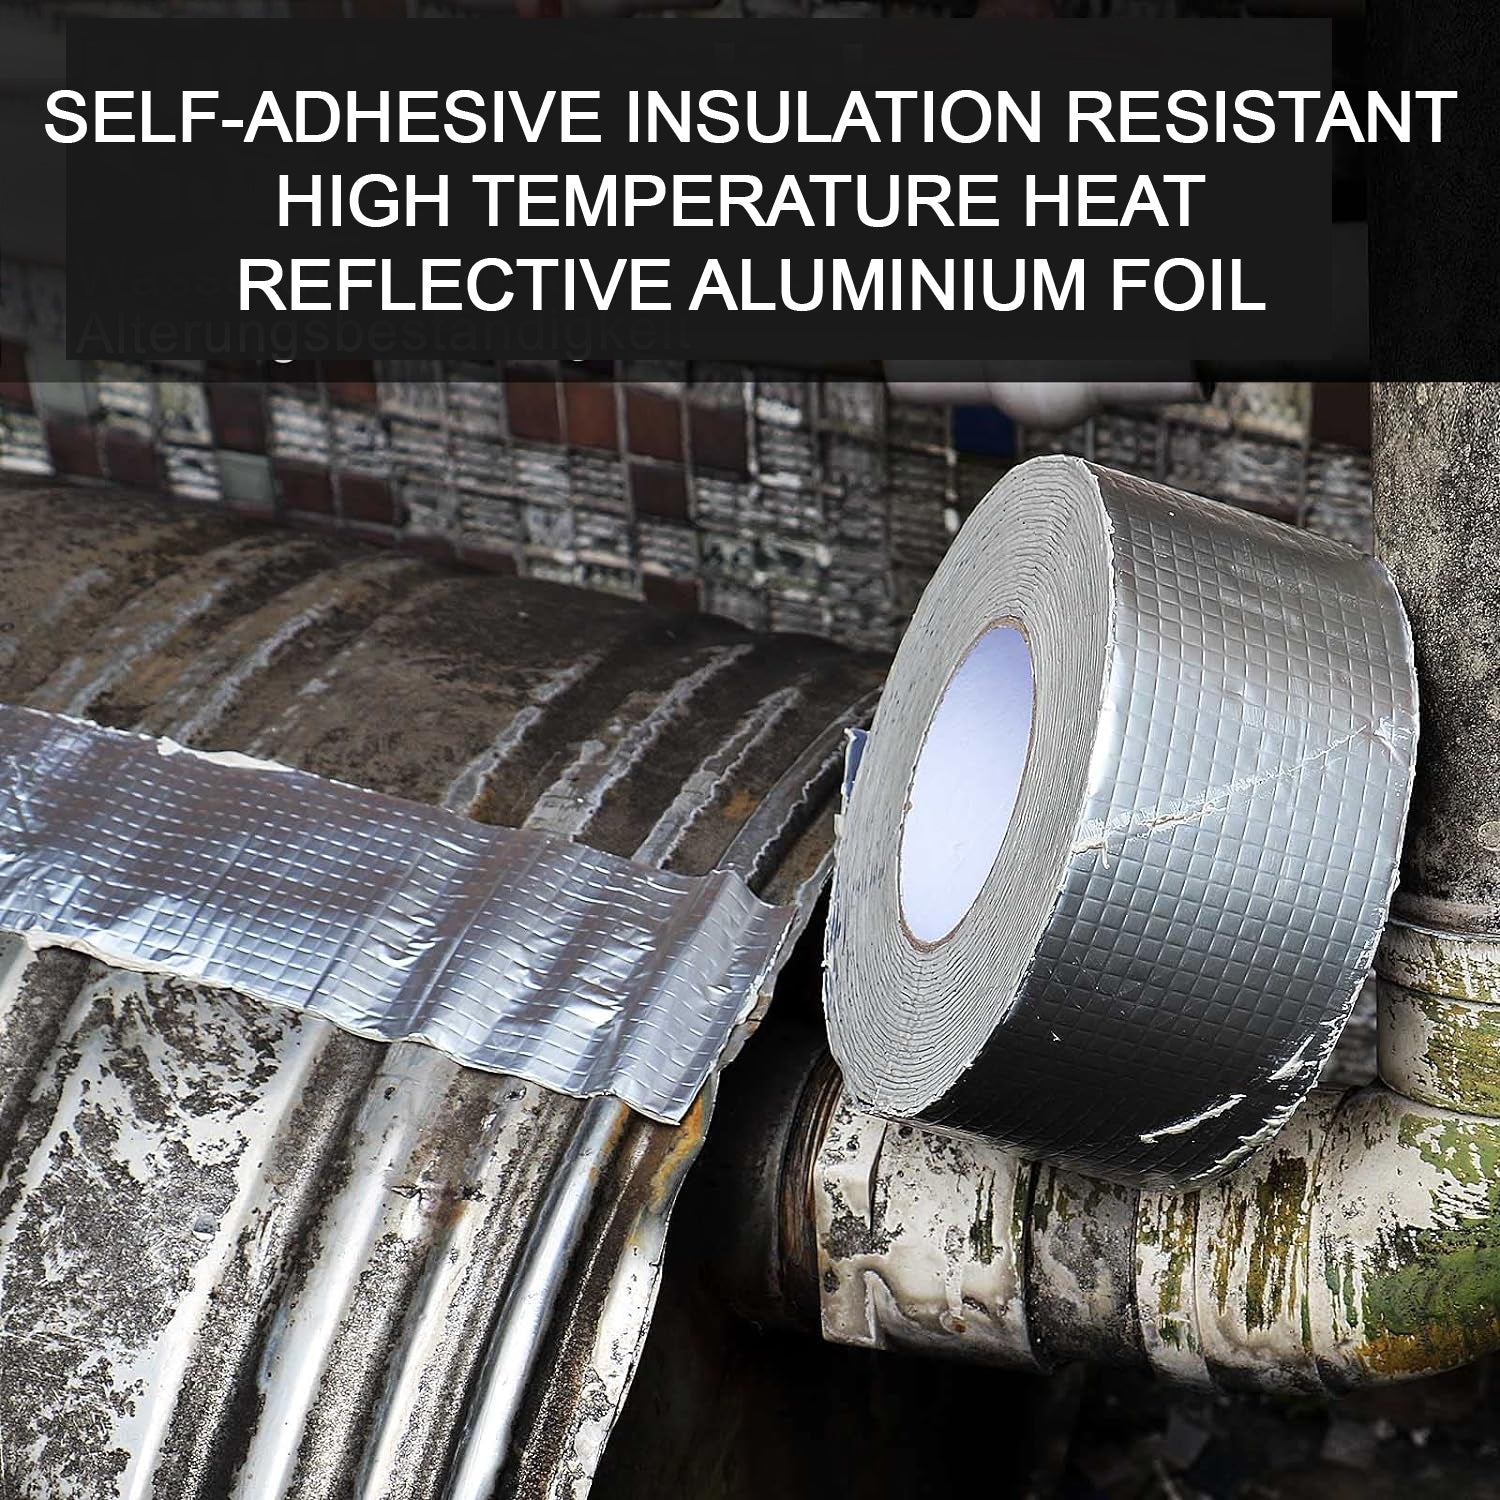 7480 Self-Adhesive Insulation Resistant High Temperature Heat Reflective Aluminium Foil Duct Tape Roll (1 Pc 796 Gm)